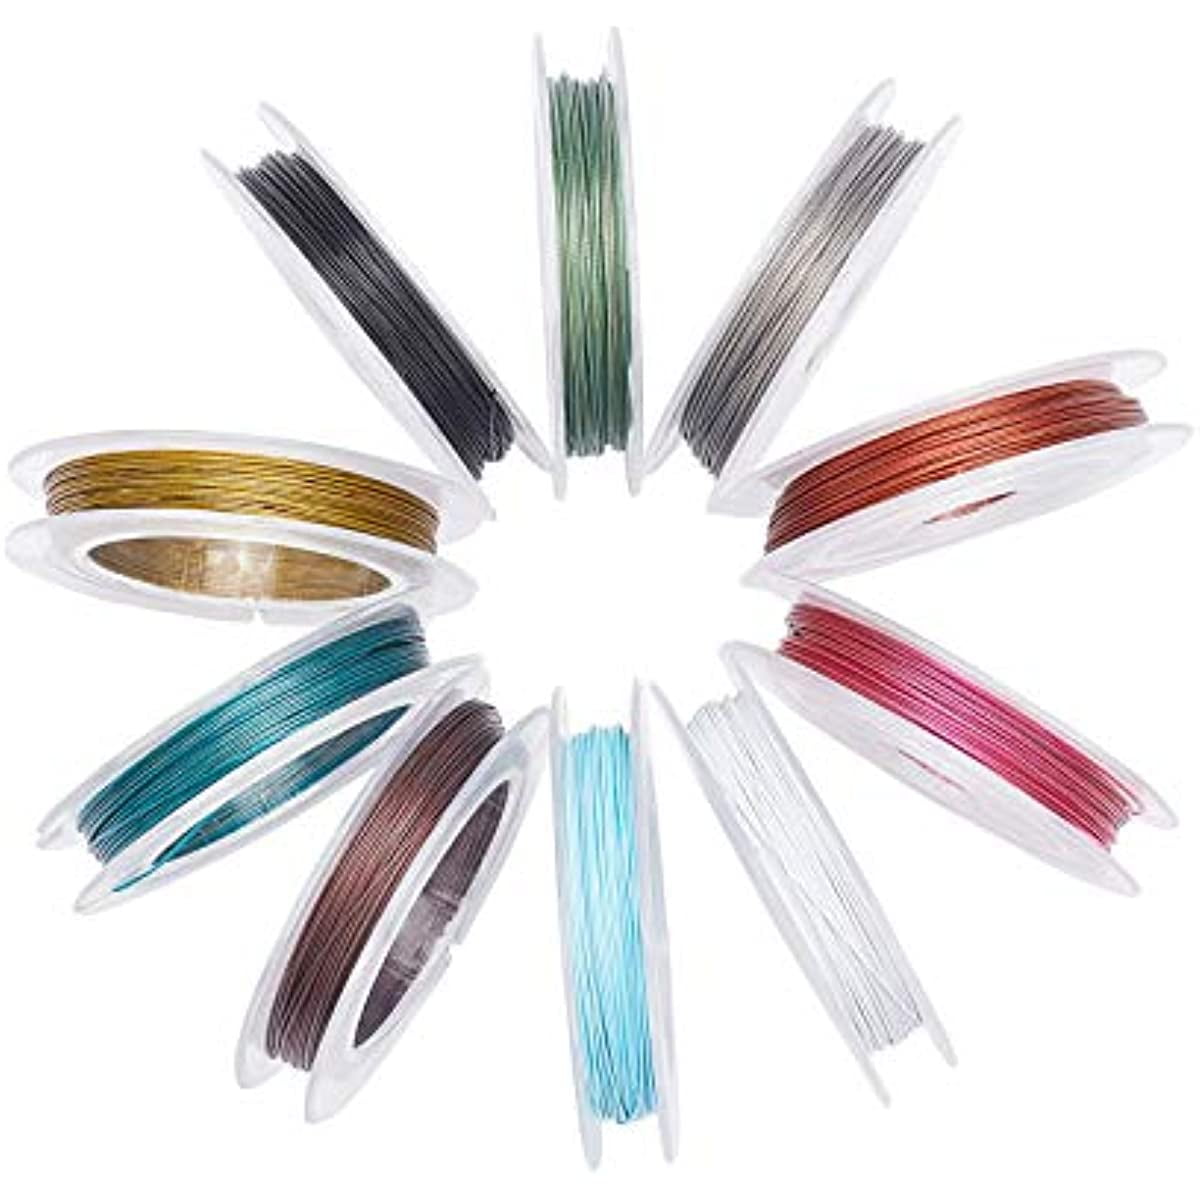 3 Rolls Nylon-coated Steel Wire 0.38mm 0.45mm Resistant Tiger